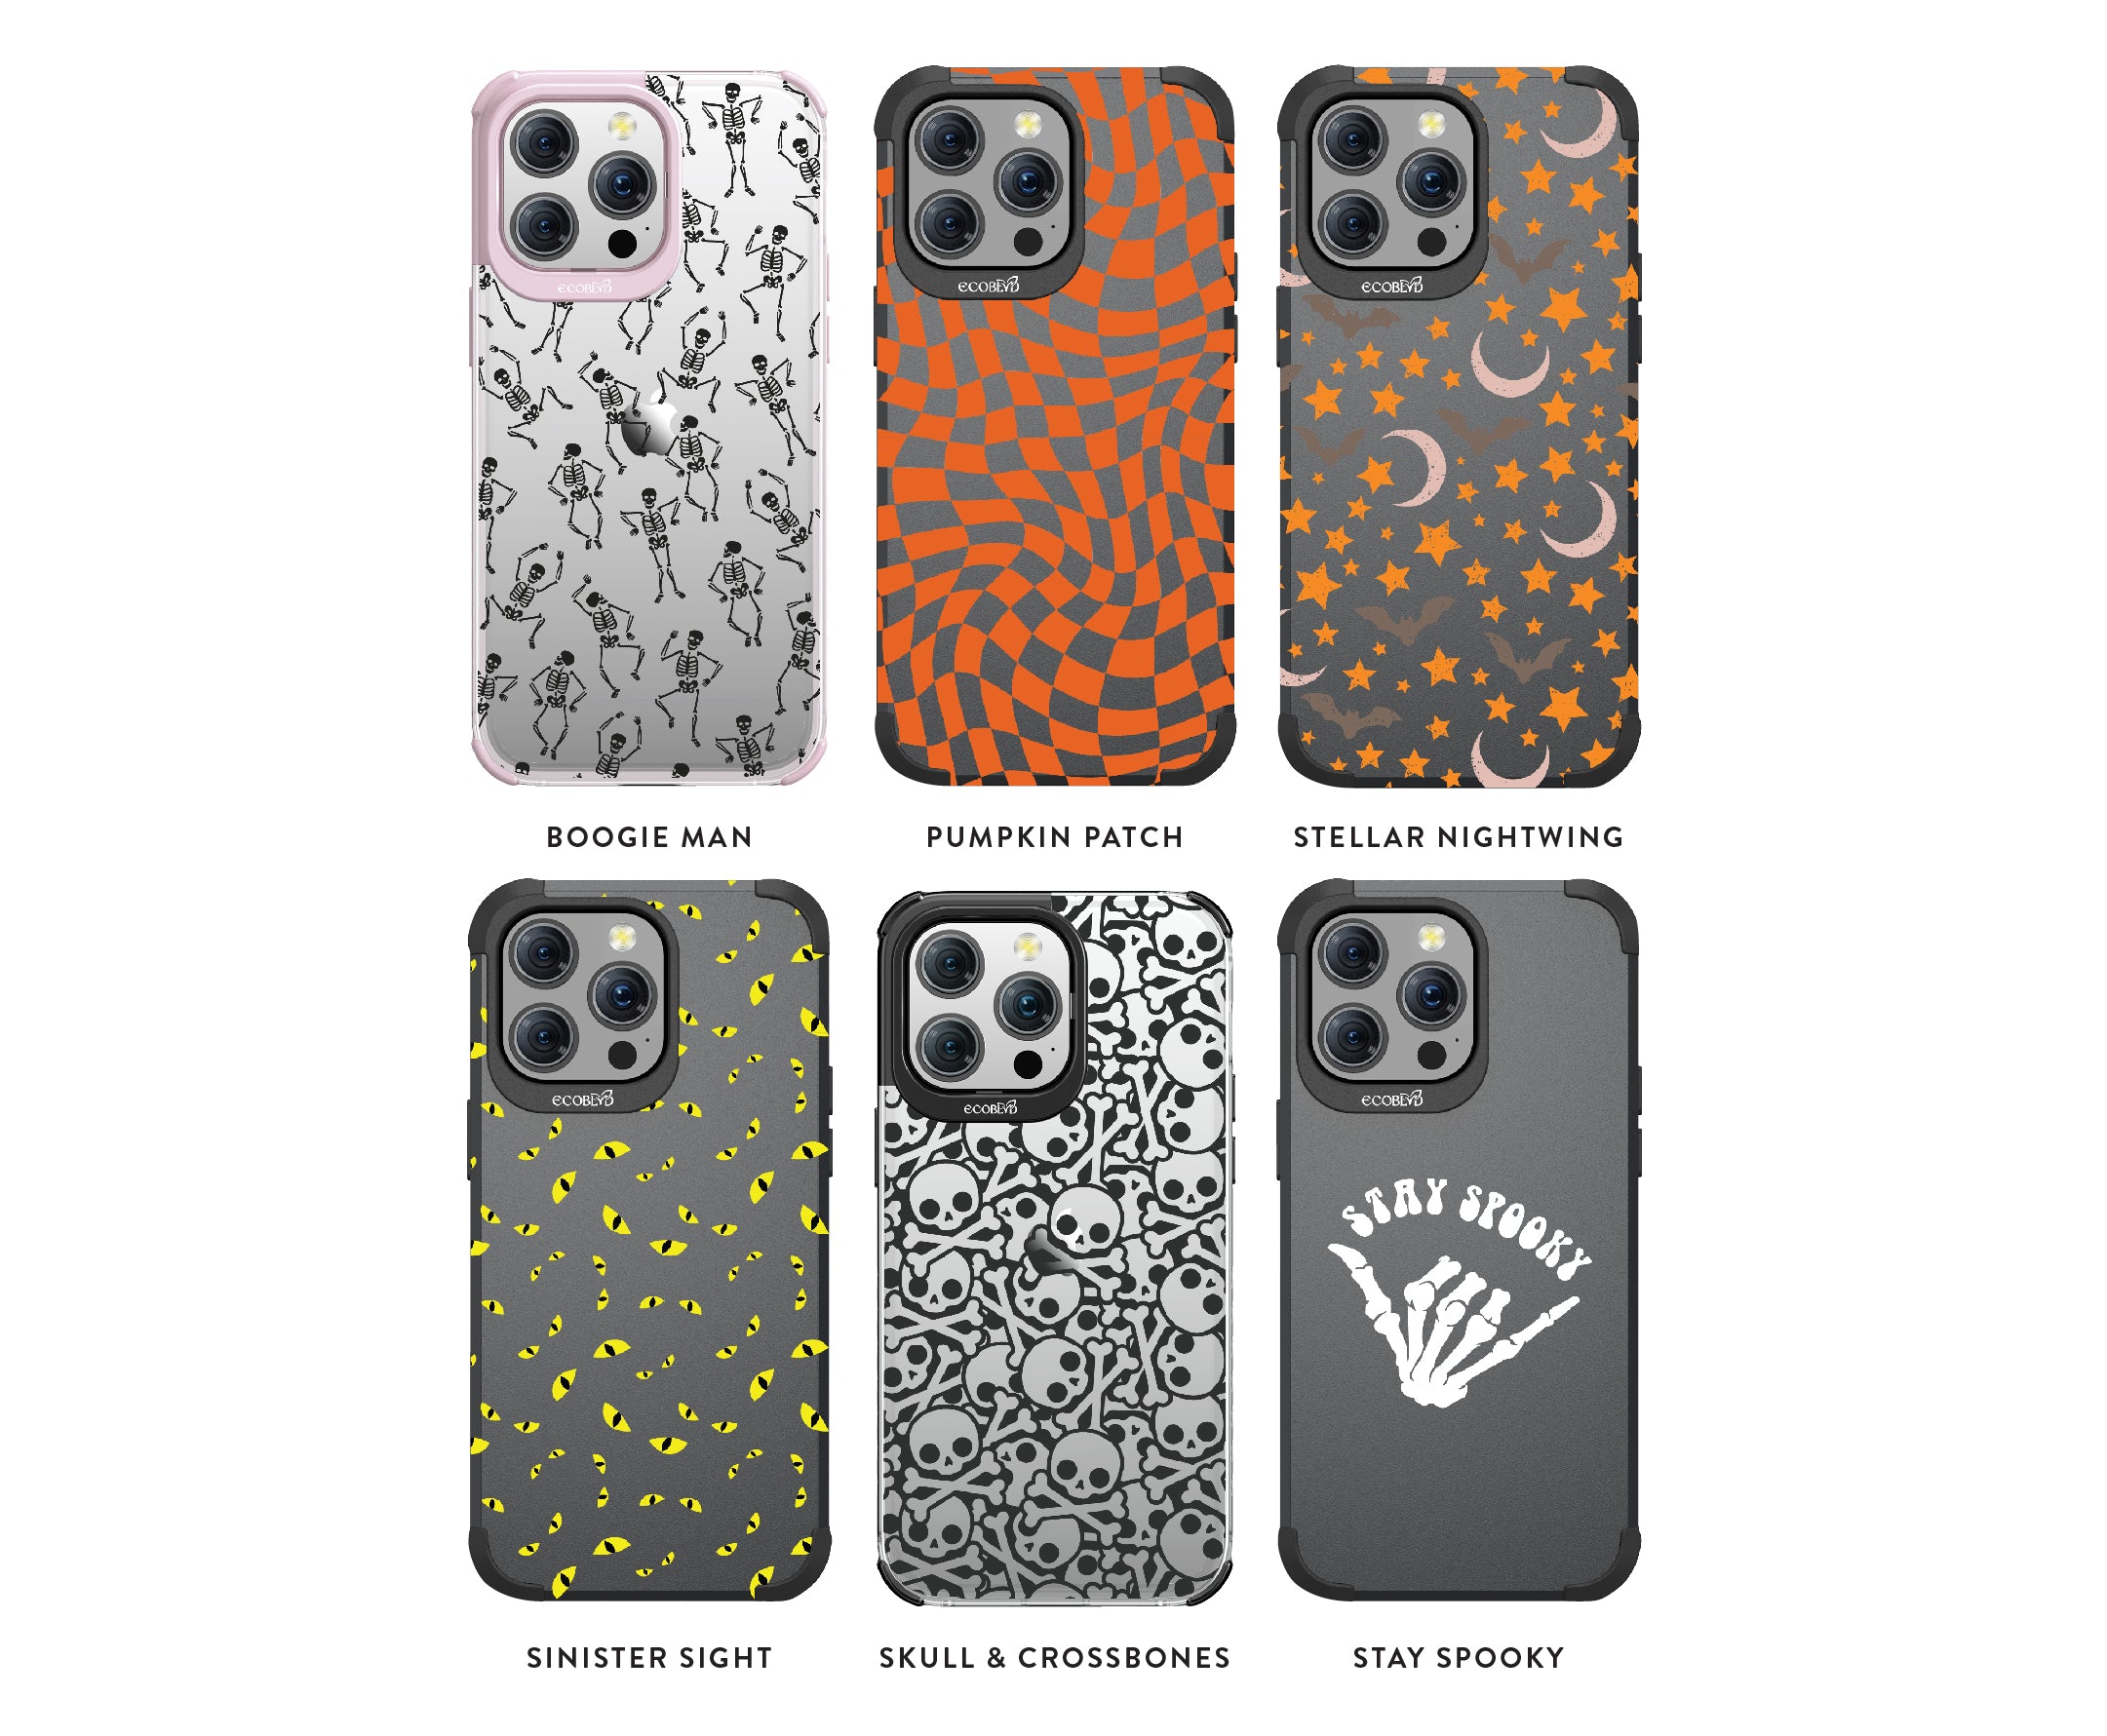 EcoBlvd's Boogie Man, Pumpkin Patch, Sinsiter Sight, Skull & Crossbones, and Stay Spooky Phone Case Designs